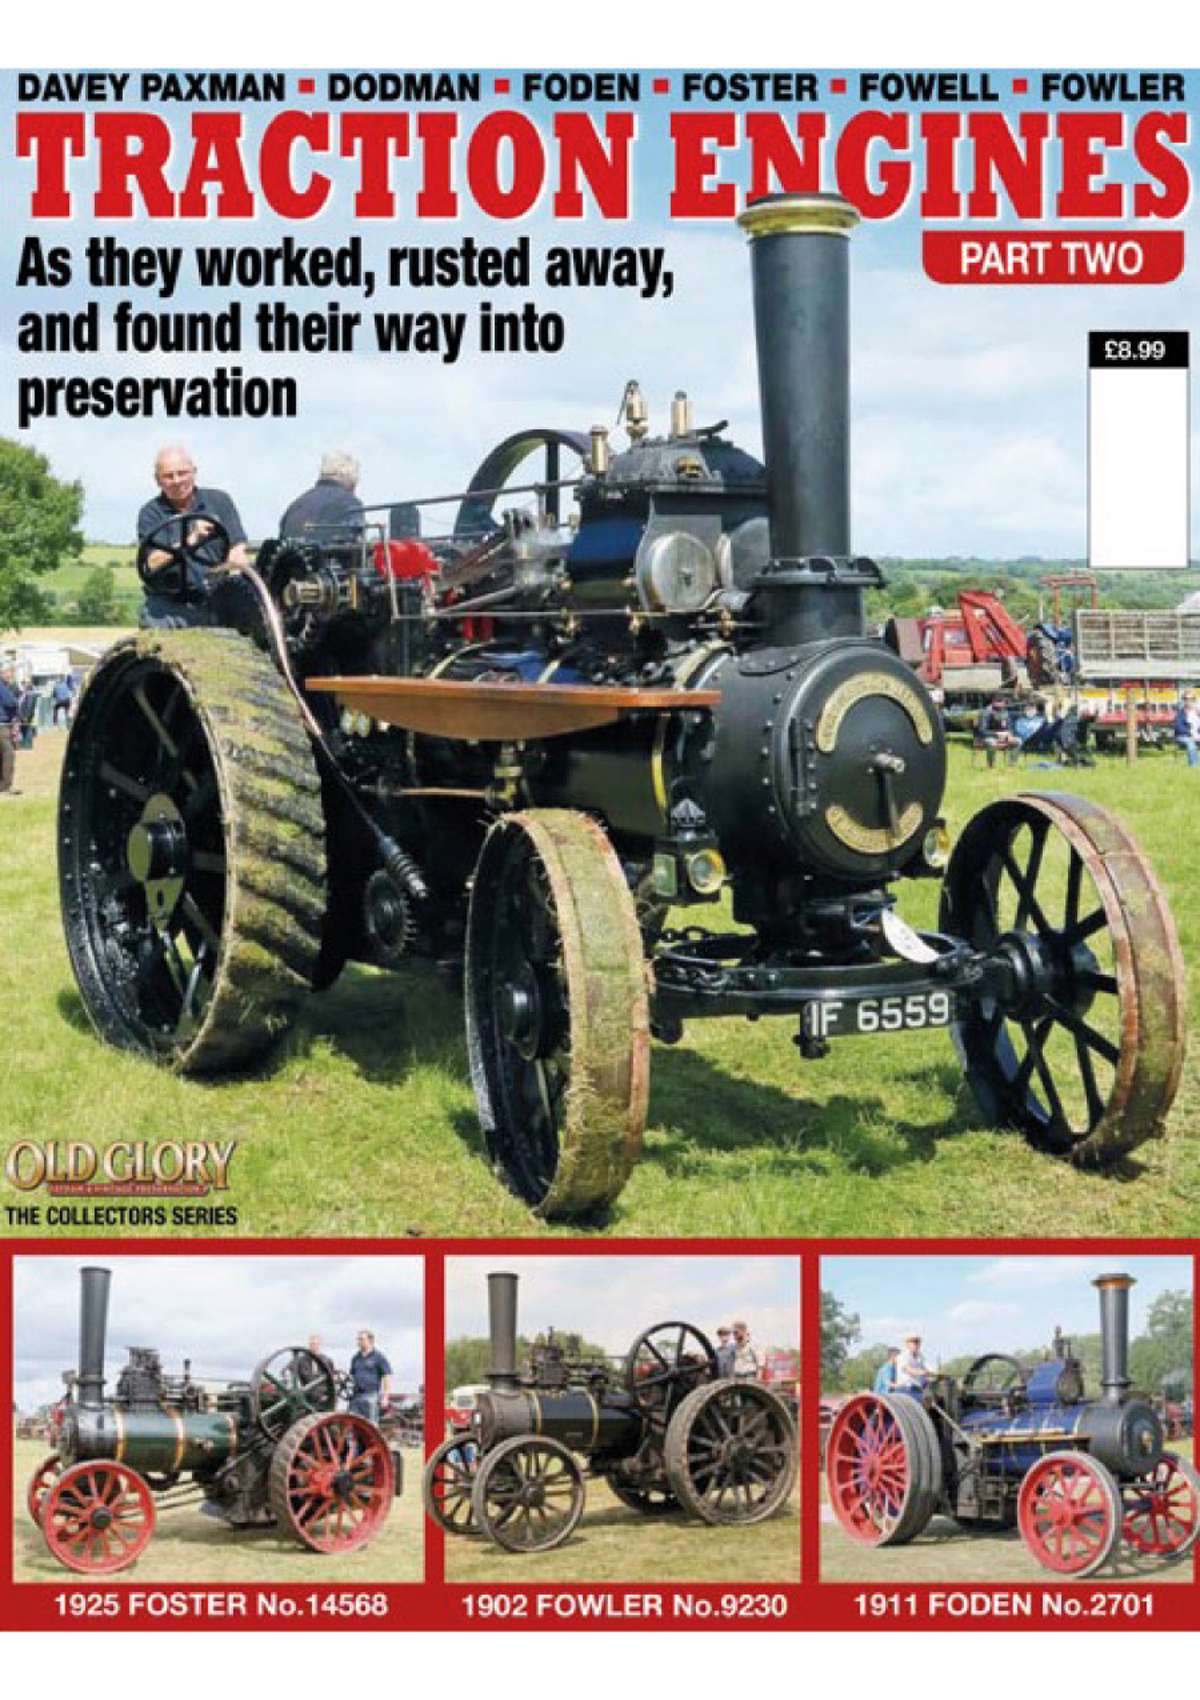 Old Glory Archive
:Traction Engines Part 2
